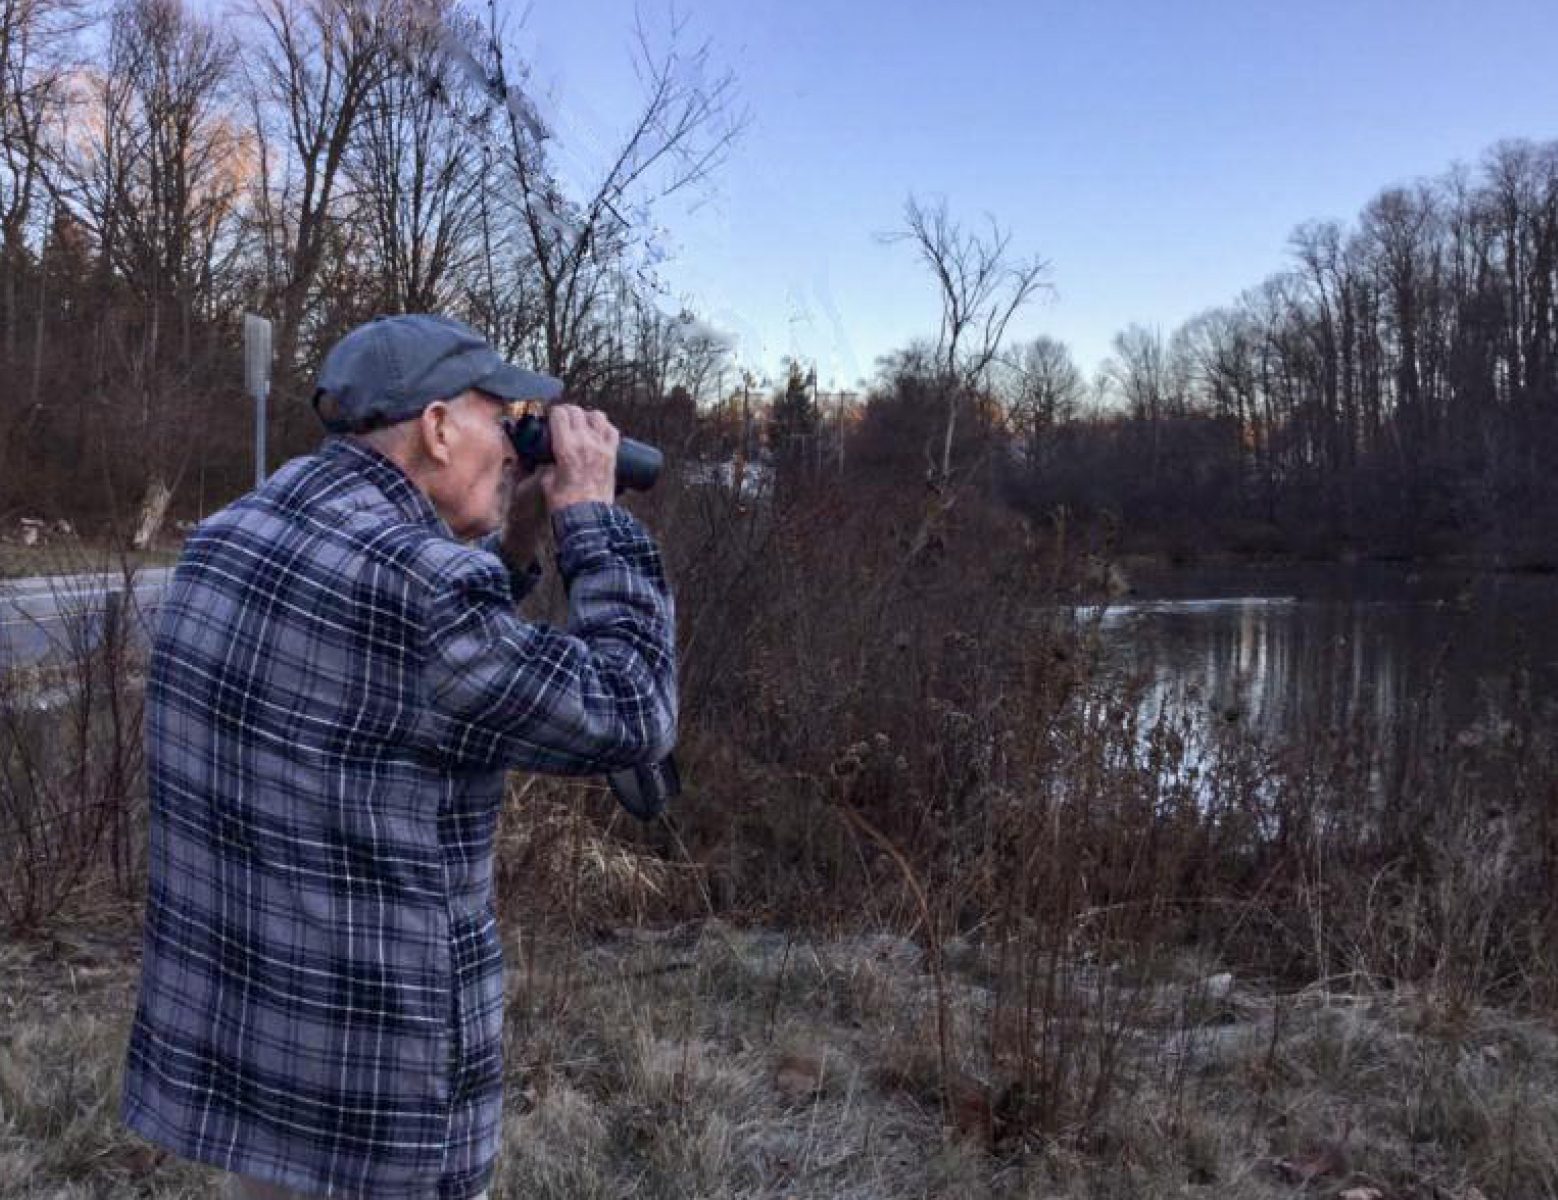 an elderly man in a blue plaid shirt looks away from the photographer, through binoculars, at a late-winter pond and trees